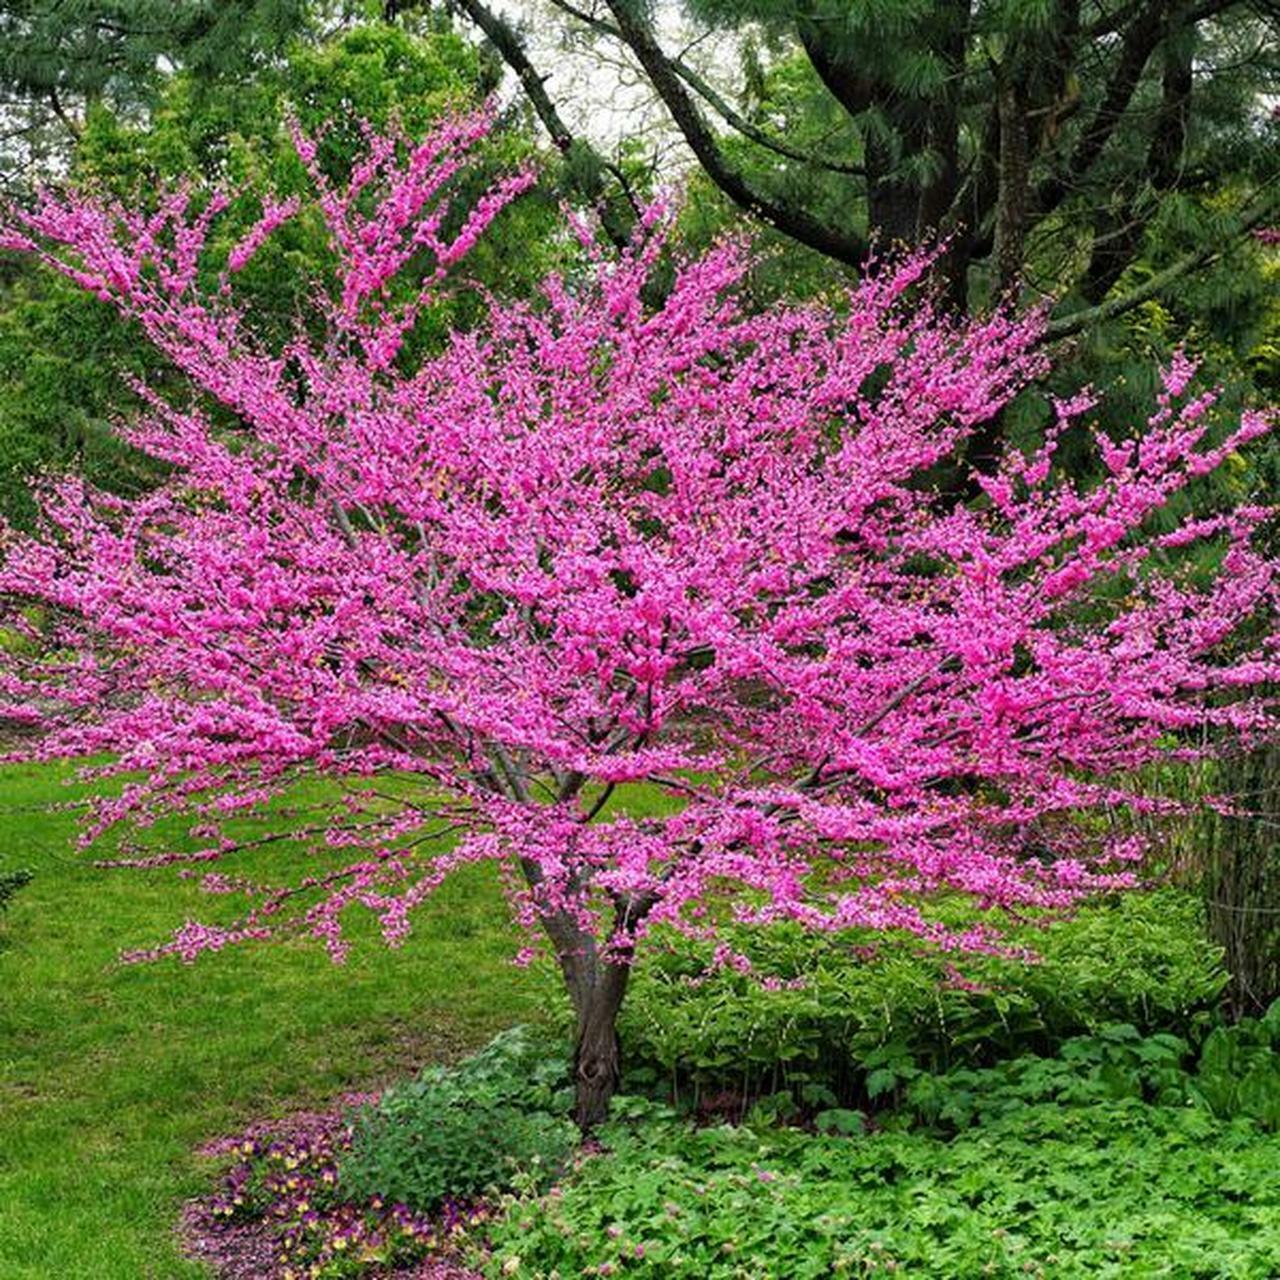 50 Cercis chinensis Seeds ,The Chinese Redbud Seeds, Redbud Seeds